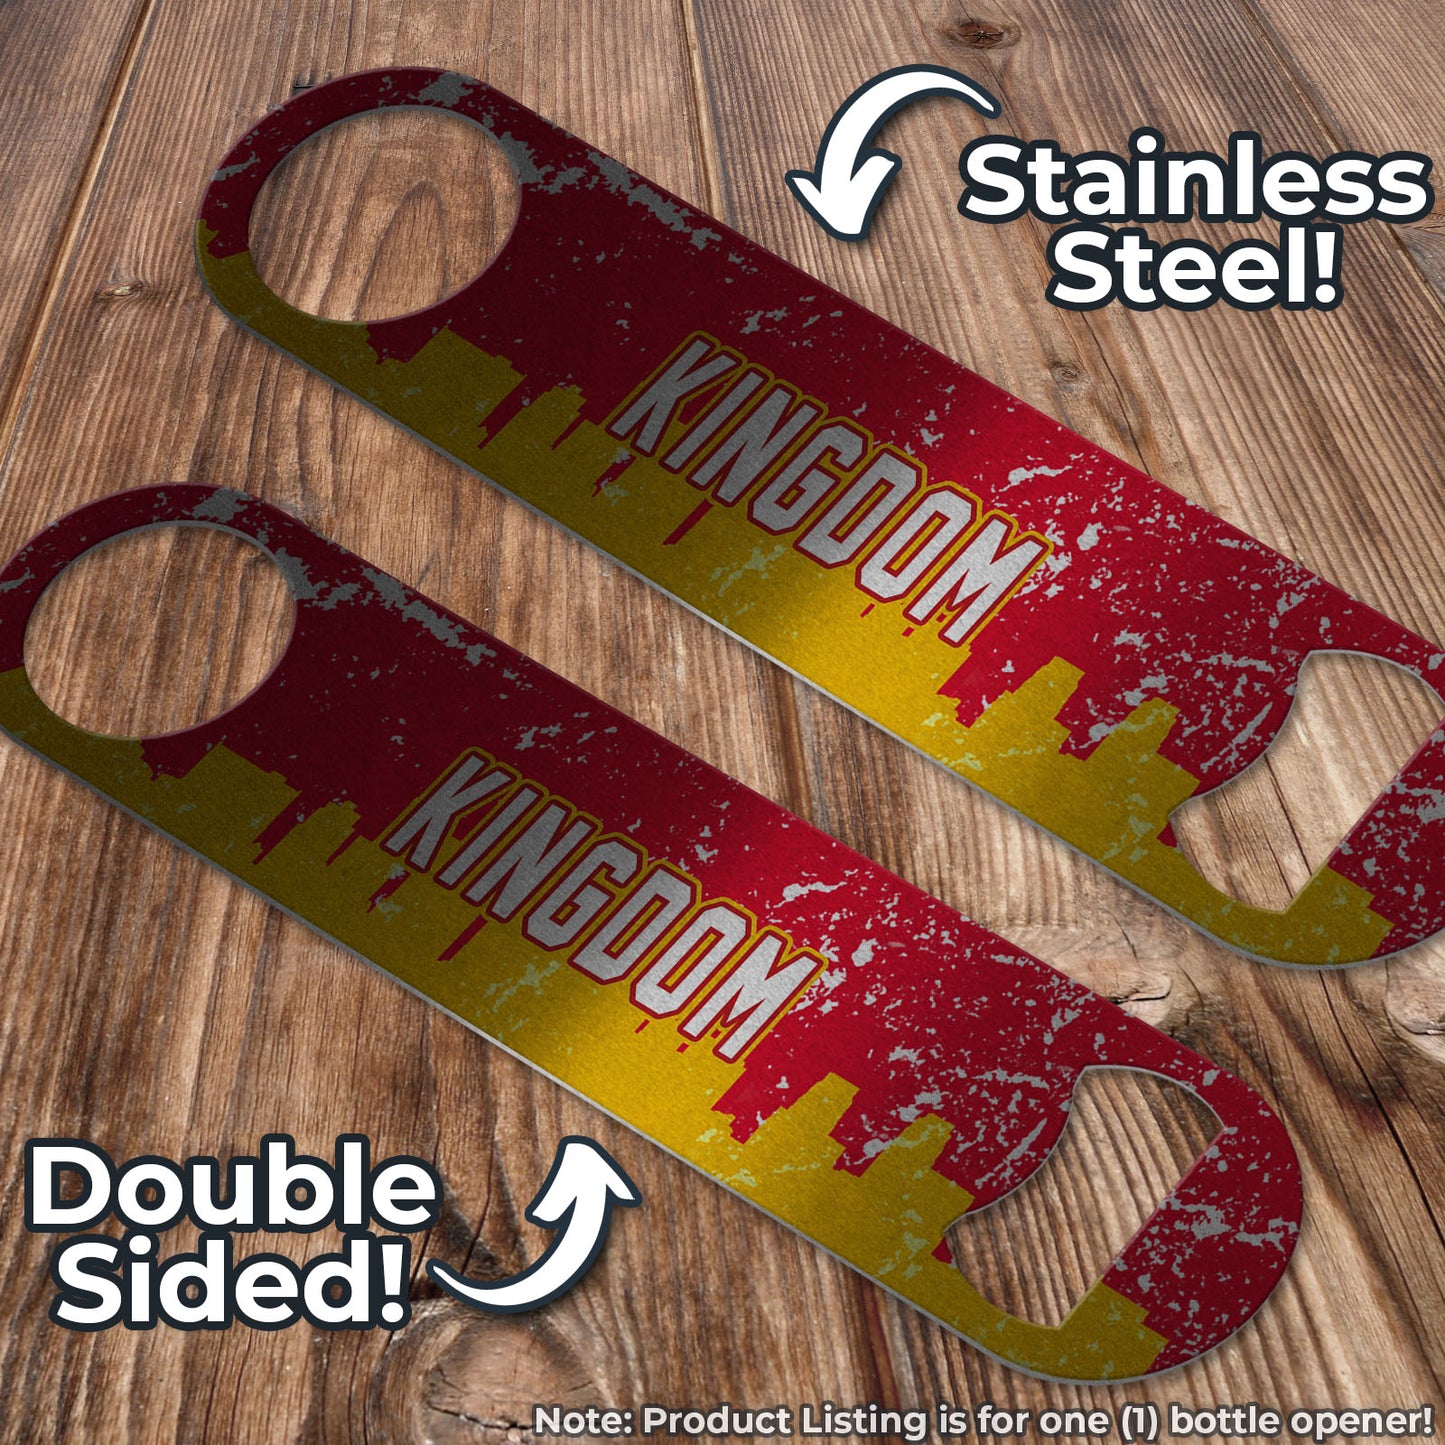 Kingdom Distressed Yellow and Red SKYLINE Football Themed Pub Style Stainless Steel Bottle Opener